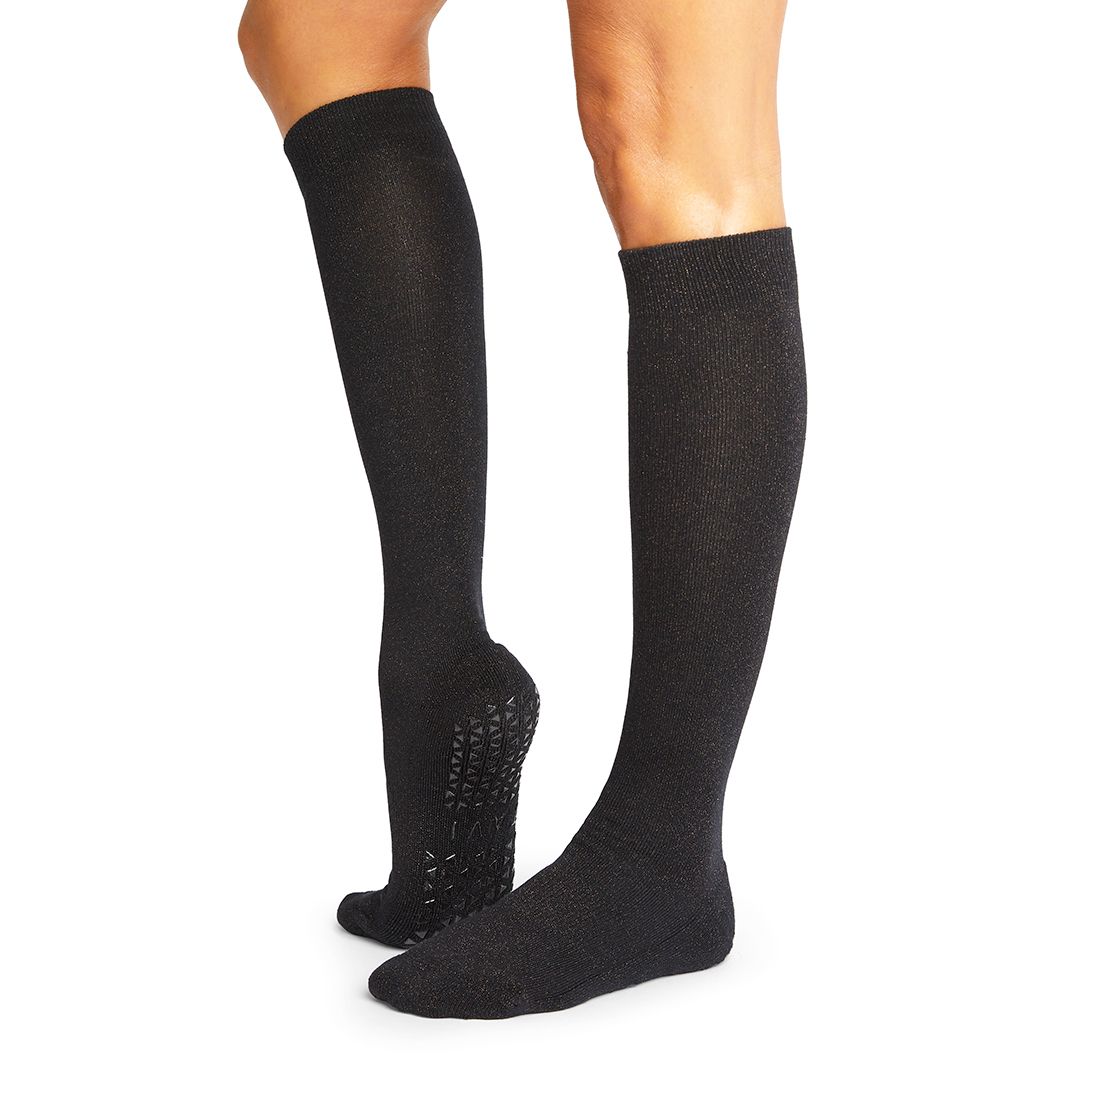 Tavi Noir Mesh Maddie Grip Sock for Barre, Pilates and Yoga, - Import It All